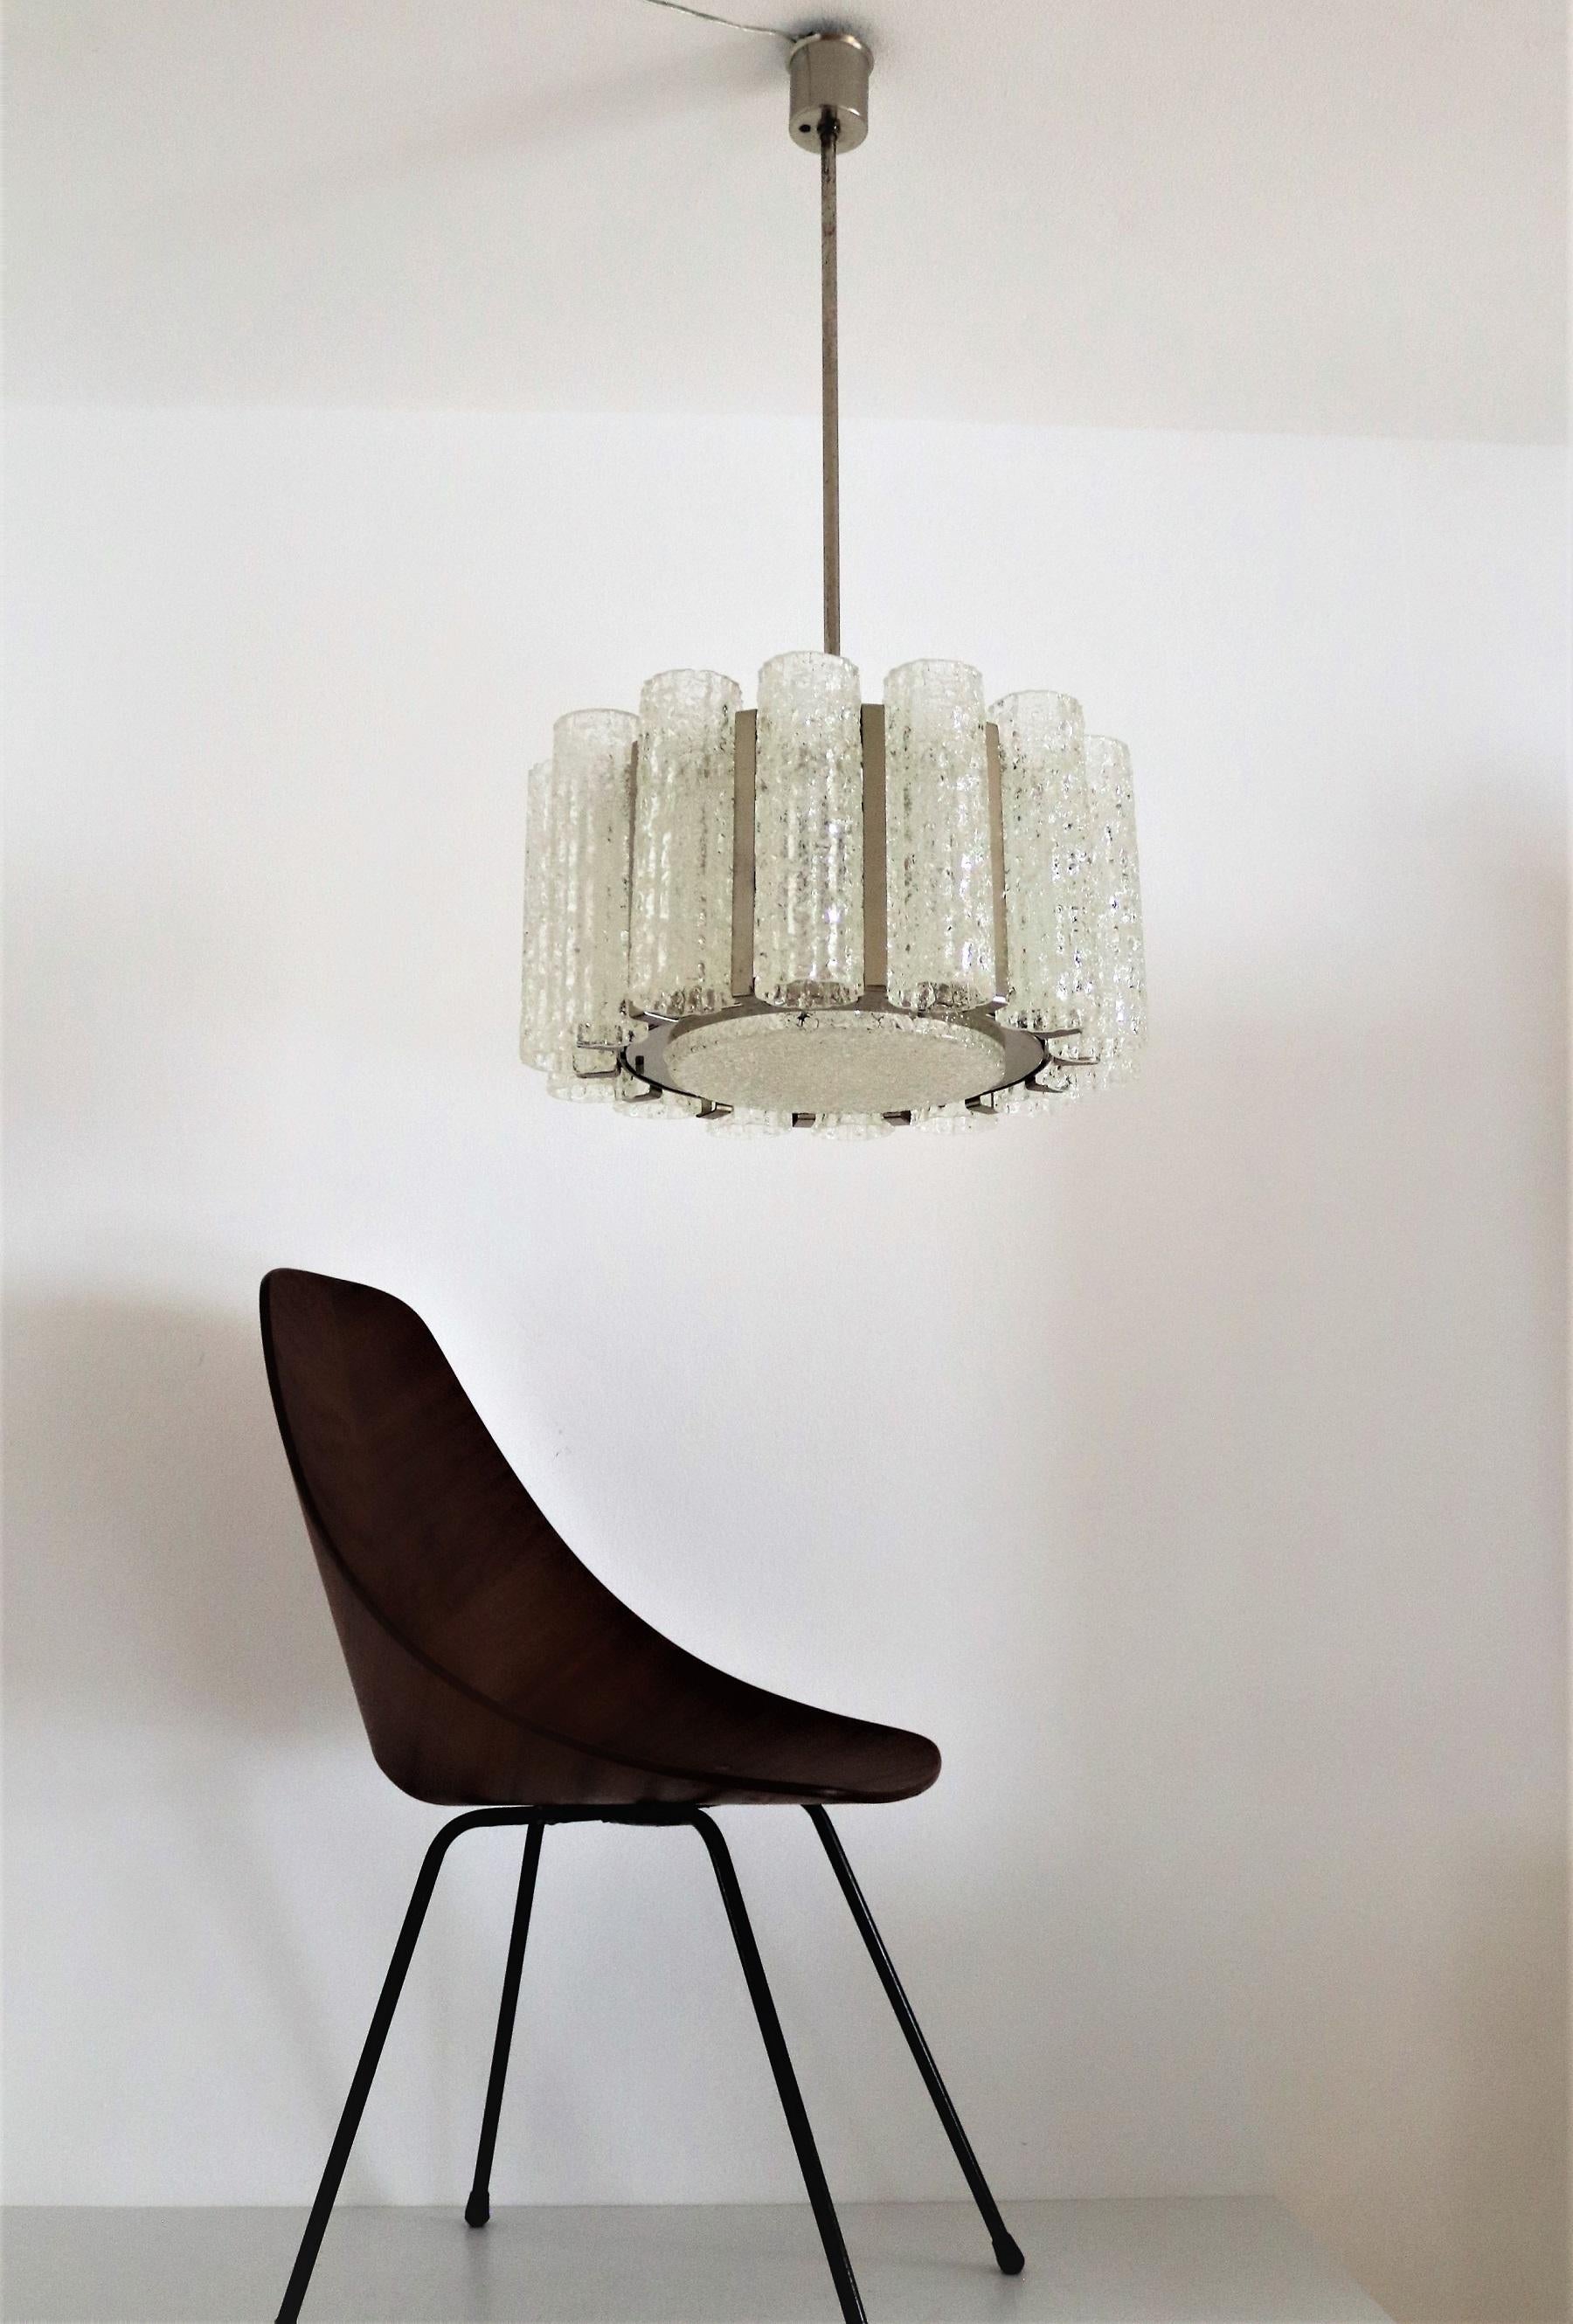 Hand-Crafted Italian Midcentury Barovier e Toso Murano Ice Glass Chandelier, 1960s For Sale